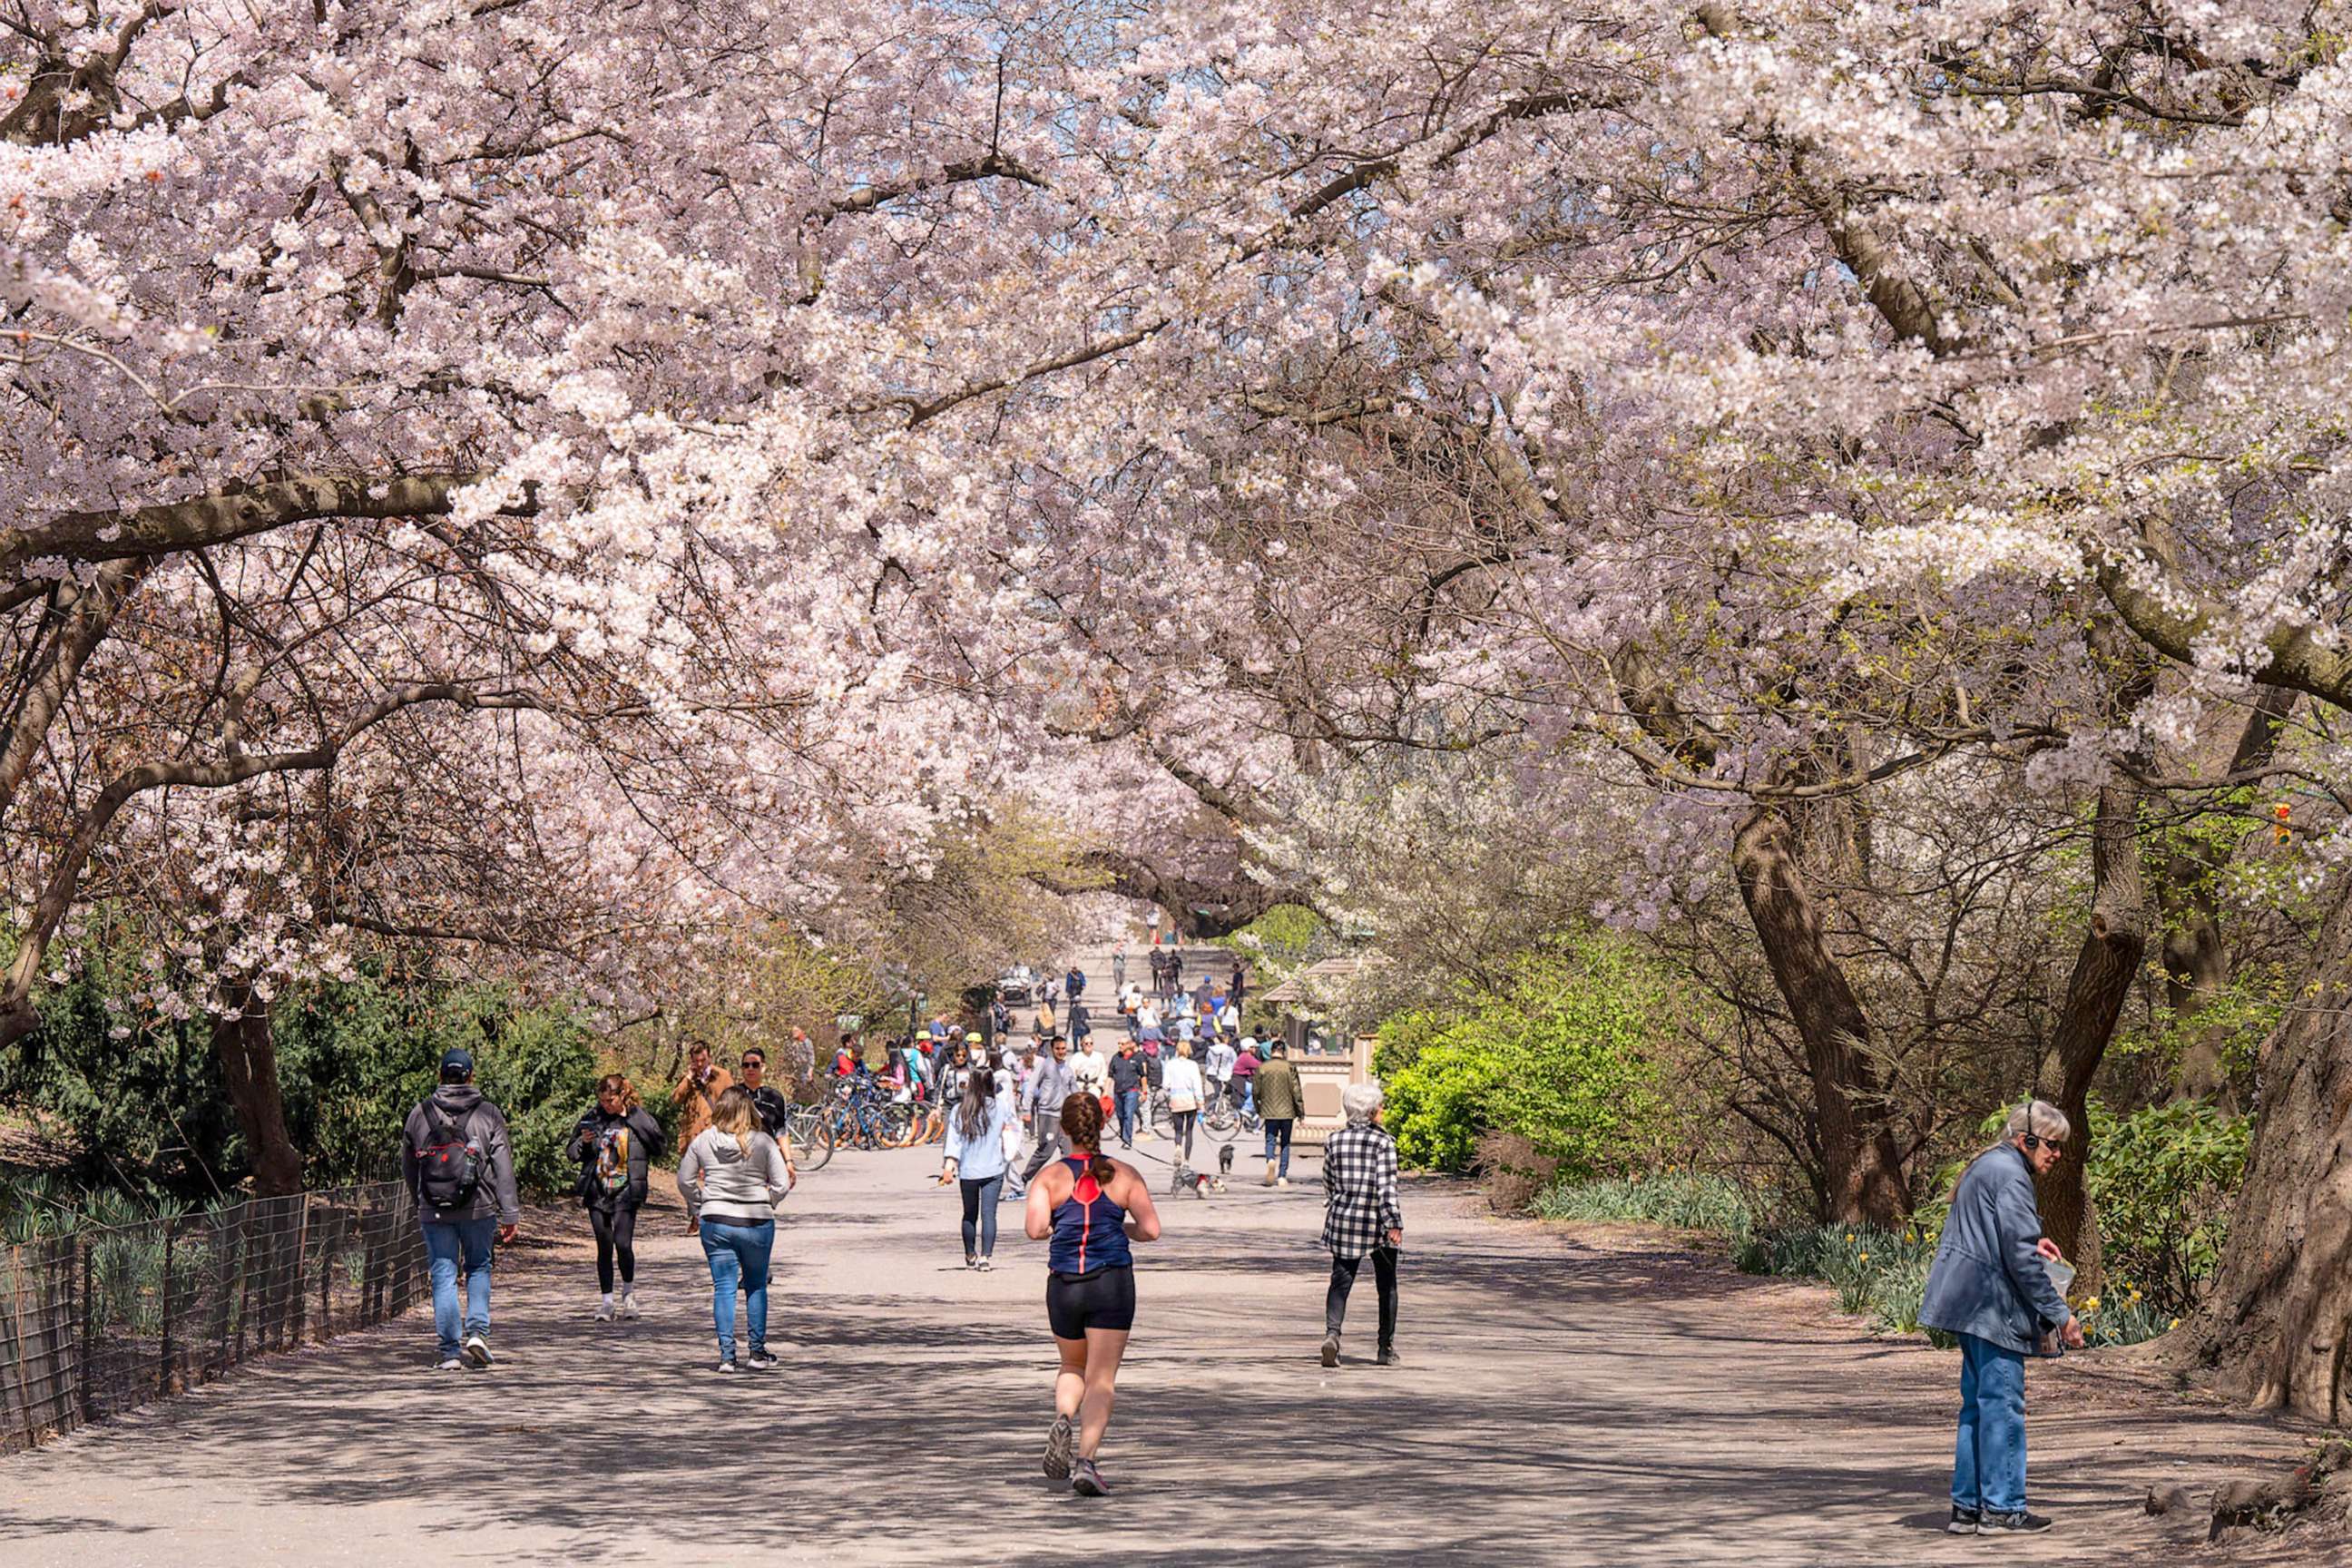 PHOTO: People walk under the cherry blossoms during spring season at Central Park in New York, on April 10, 2023.